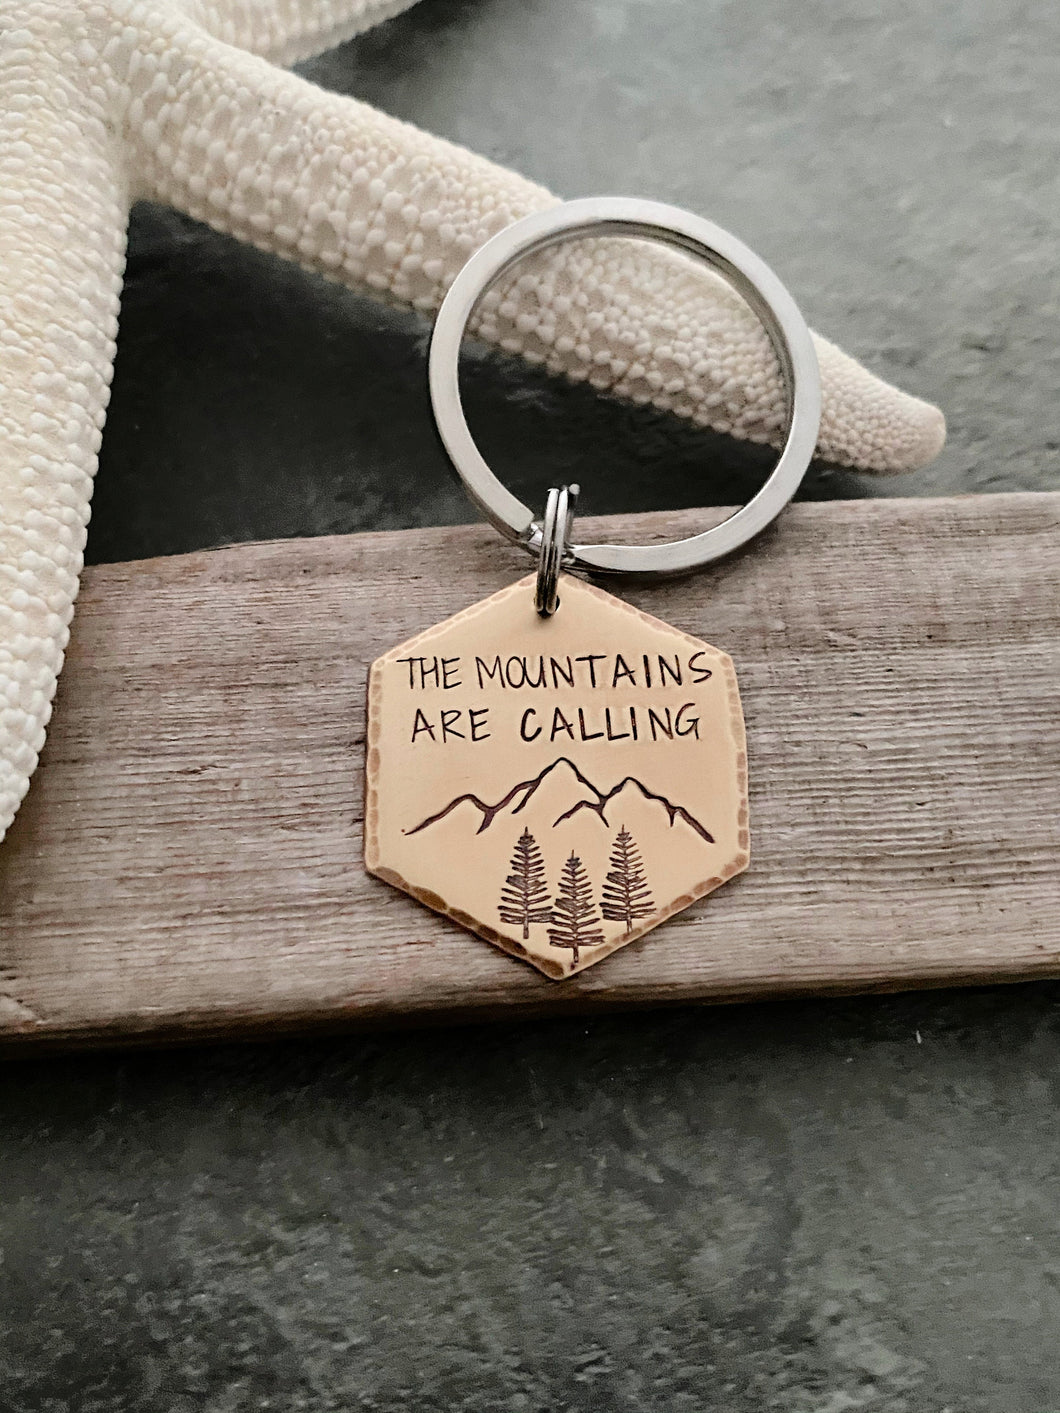 The mountains are calling - mountains and tree keychain - bronze - Outdoors key chain - hand stamped - Pacific Northwest theme